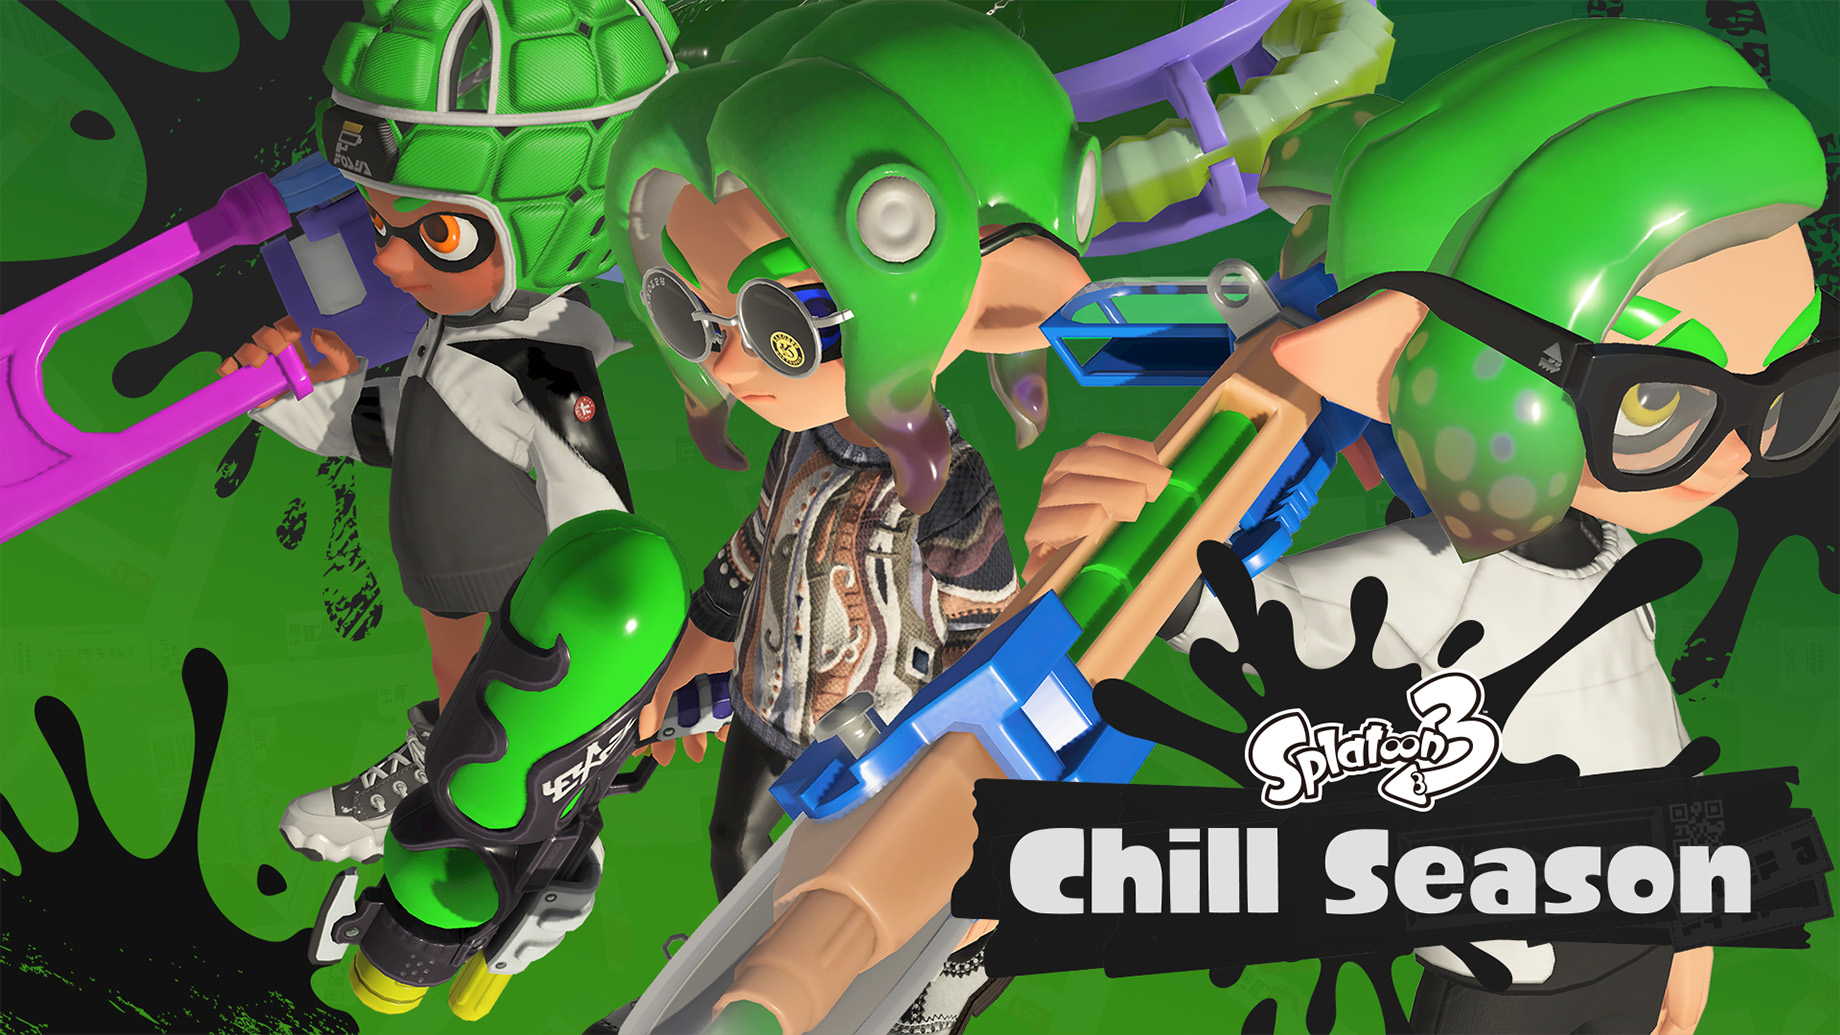 Inklings and Octolings stand ready for battle in Chill Season 2022